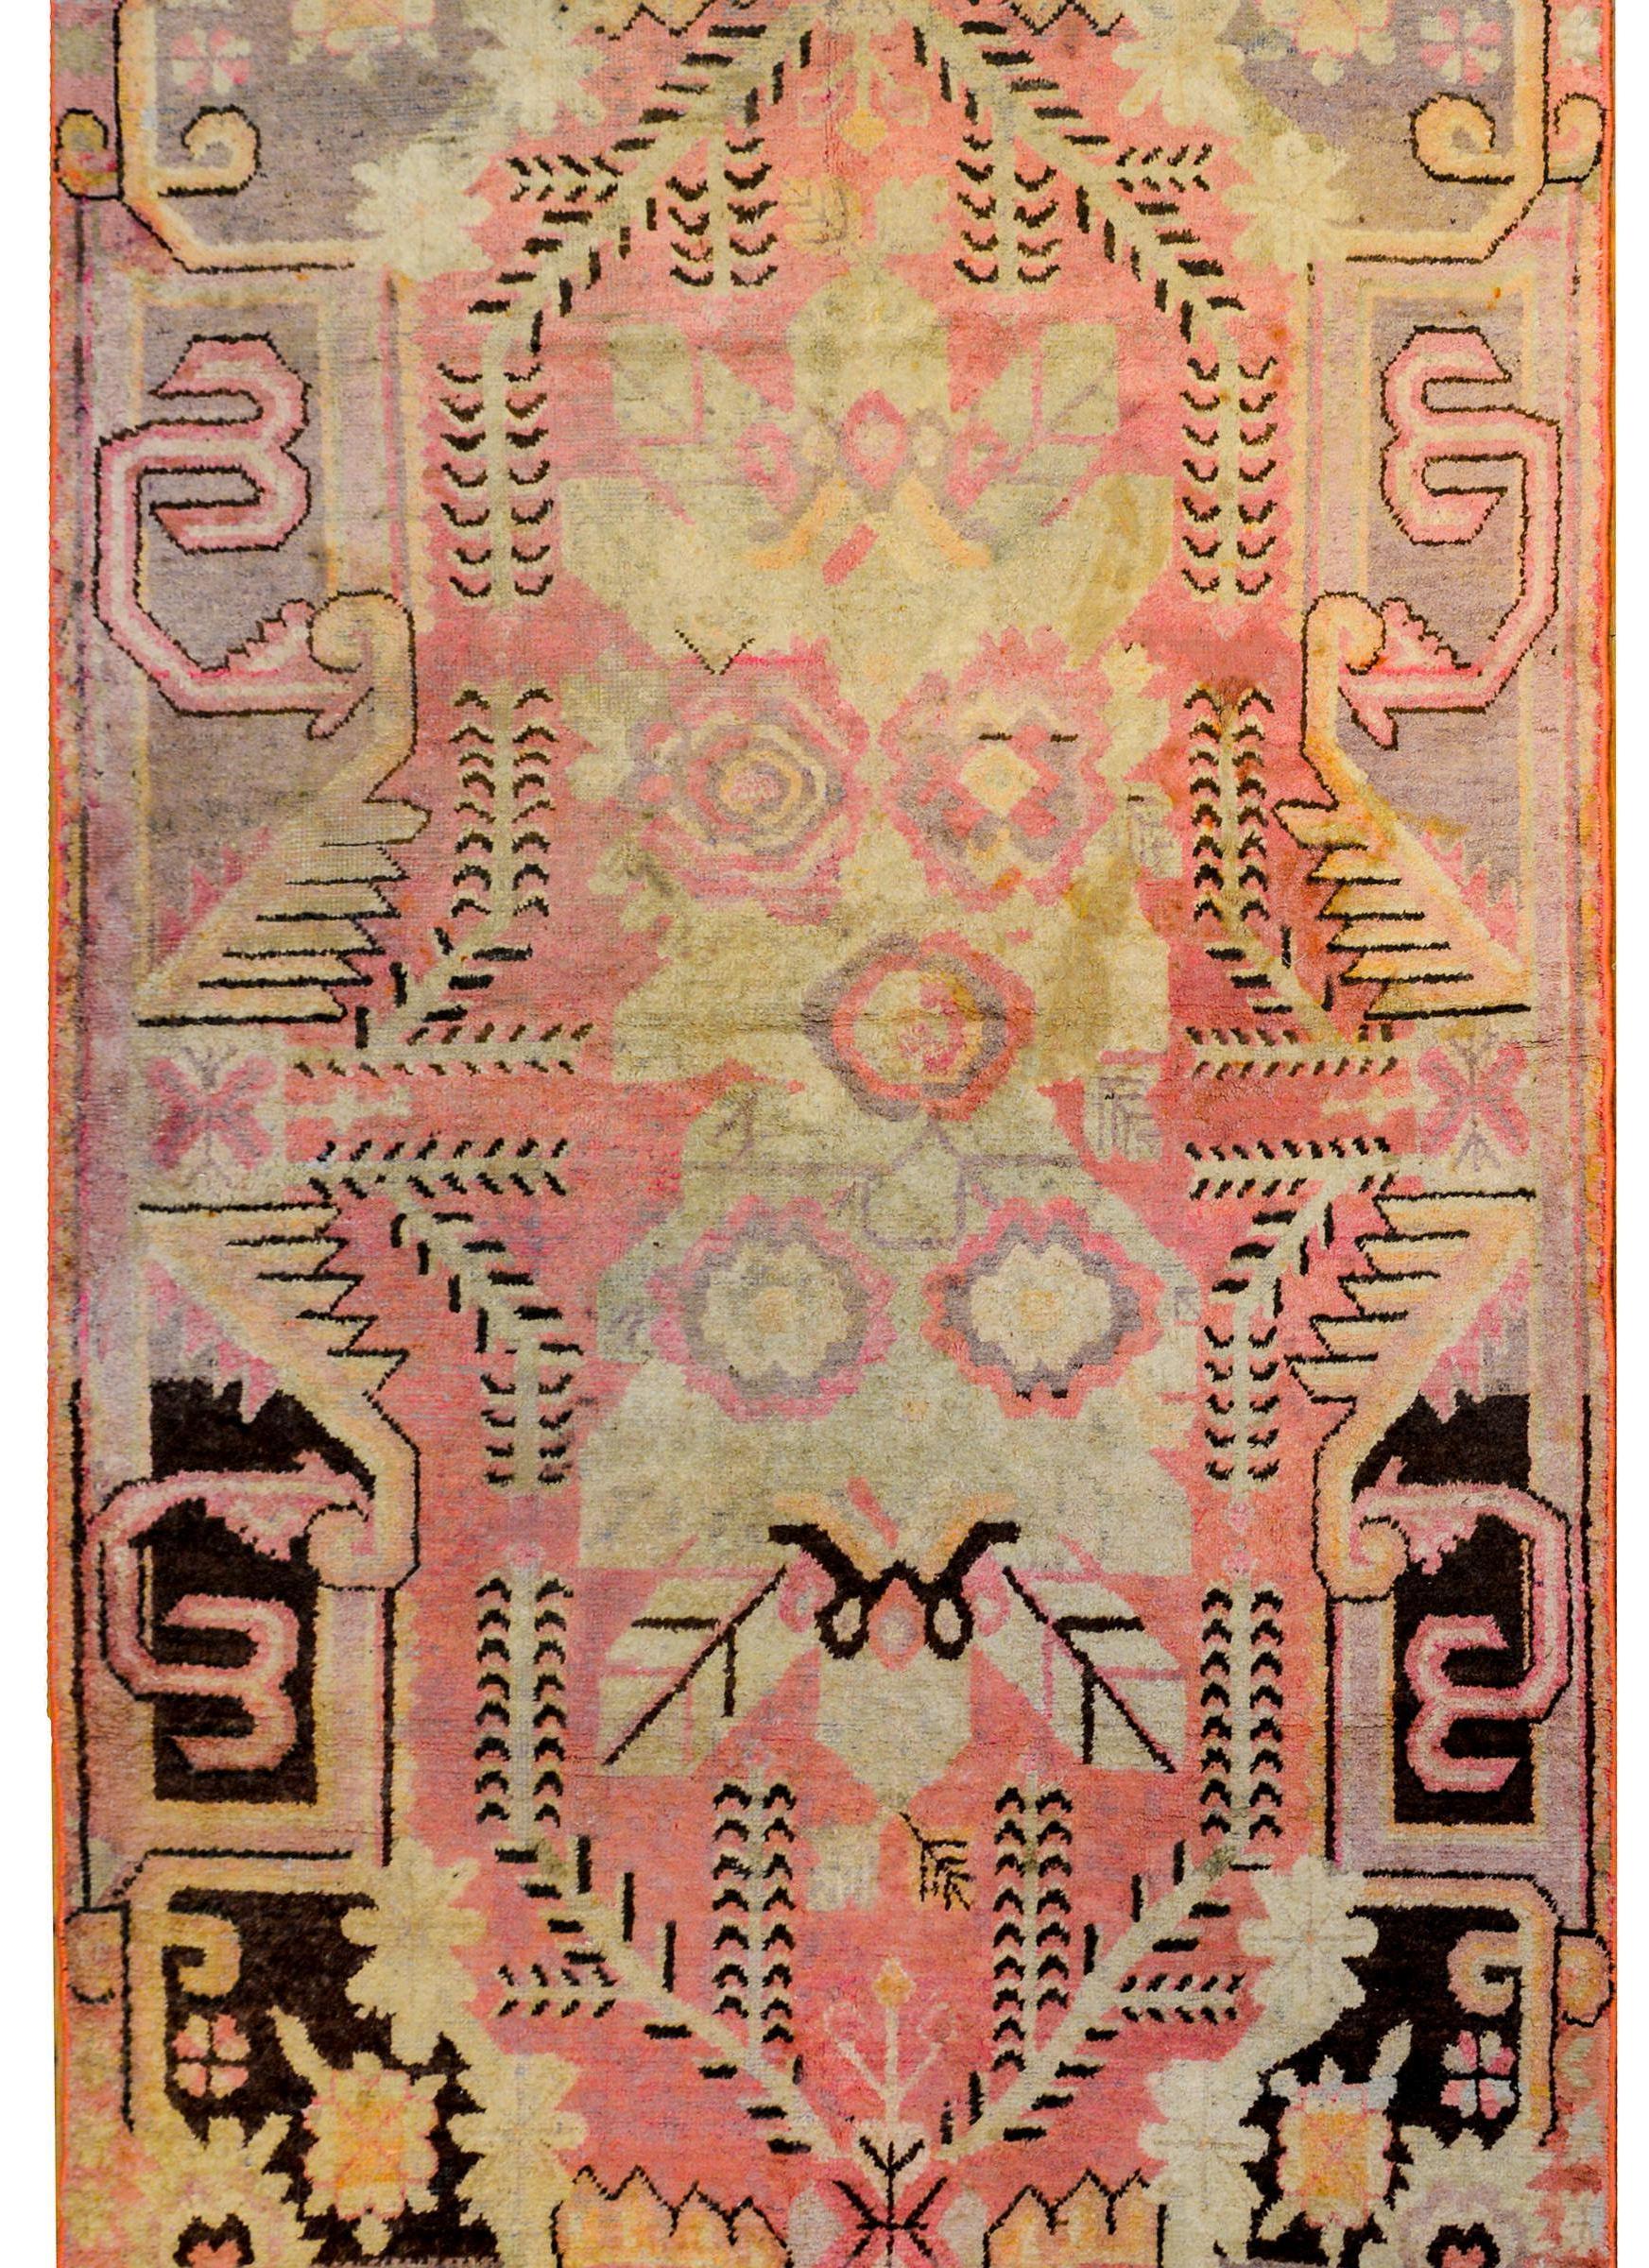 An incredible early 20th century Central Asian Khotan rug with a bold, large scale, floral and leaf pattern medallion woven in link, lavender, sherbet, and pal green, on a pink background, surrounded by a baroque floral and leaf patterned border.